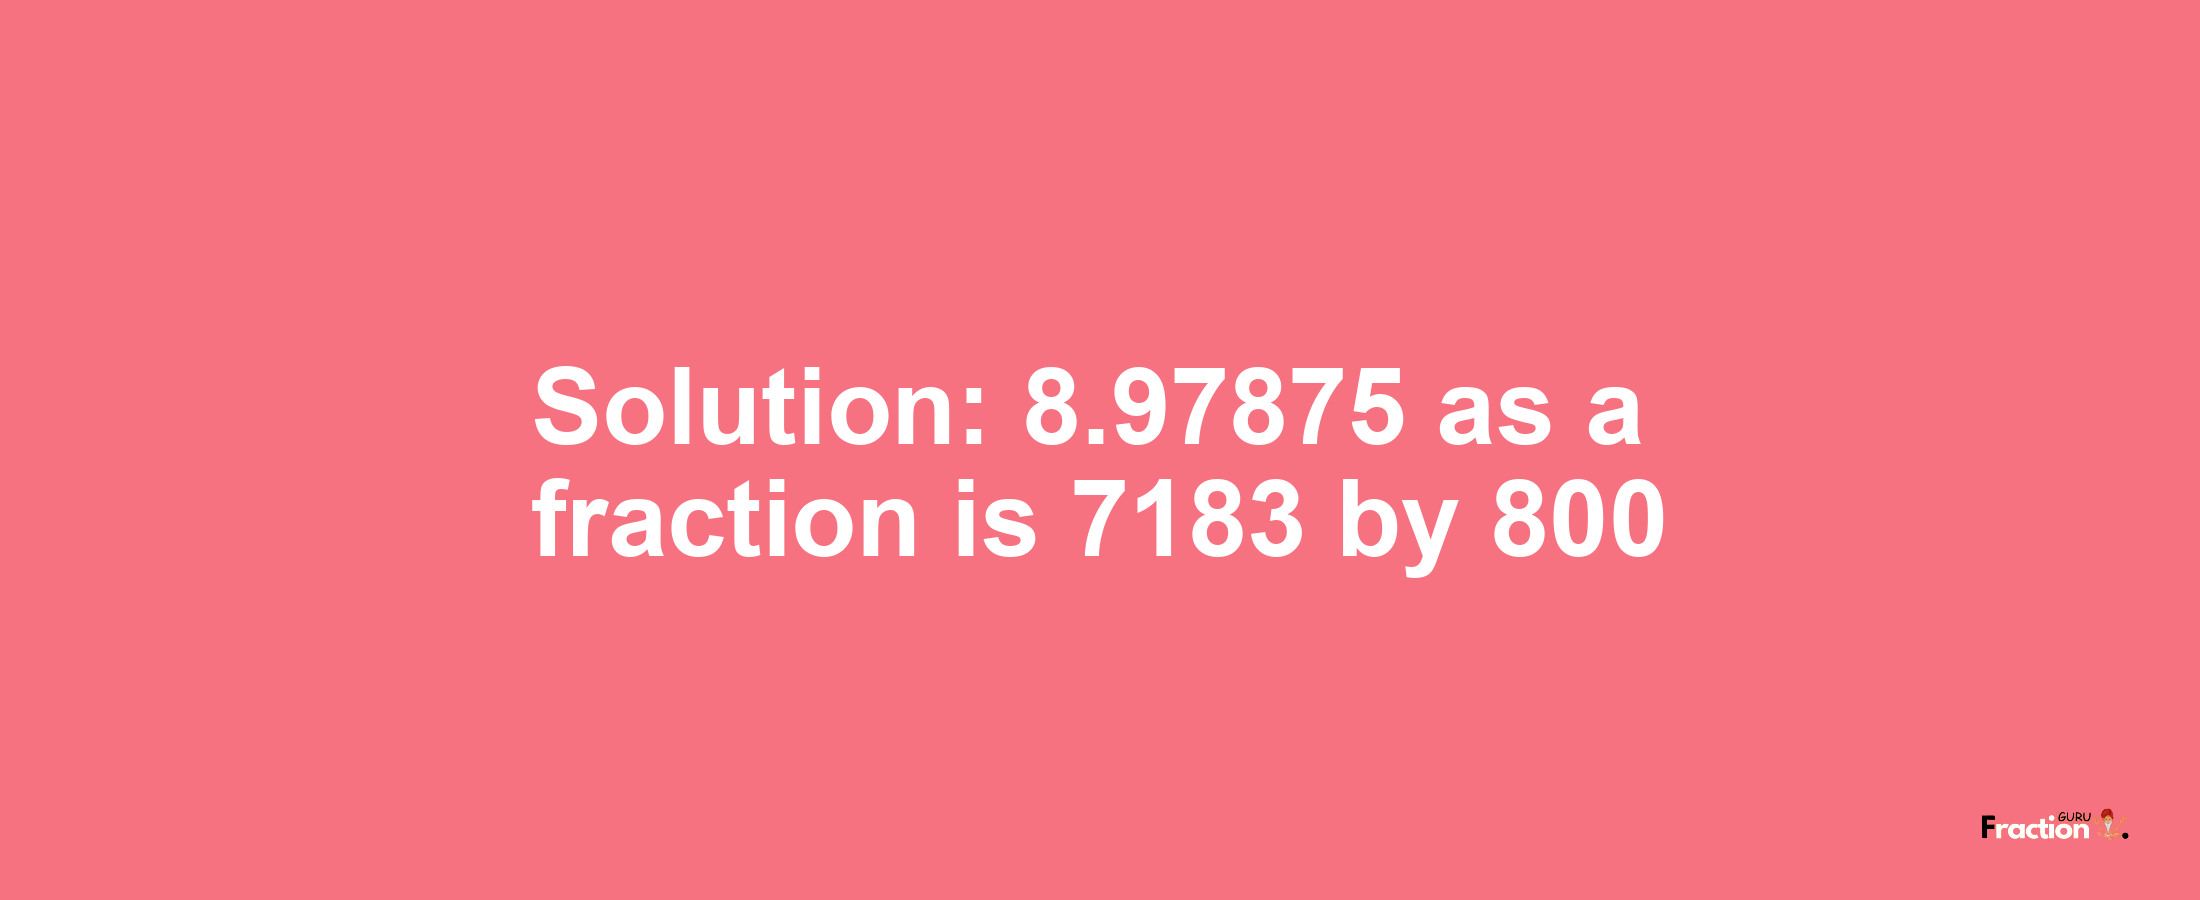 Solution:8.97875 as a fraction is 7183/800